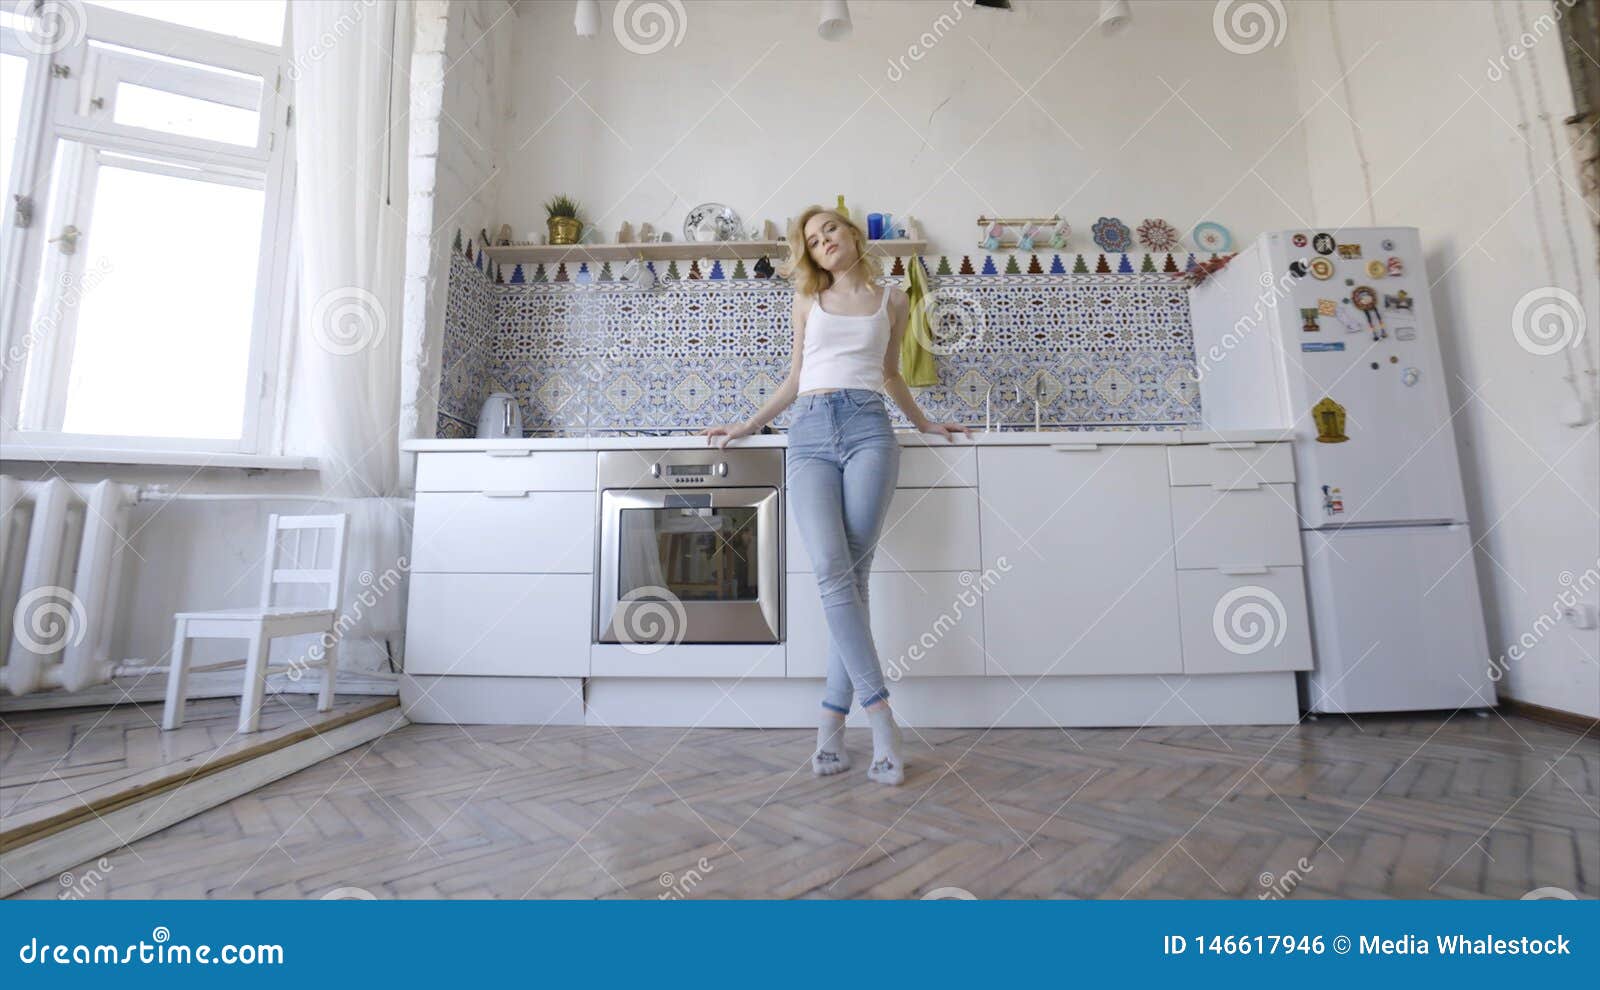 porn video in kitchen naked photo